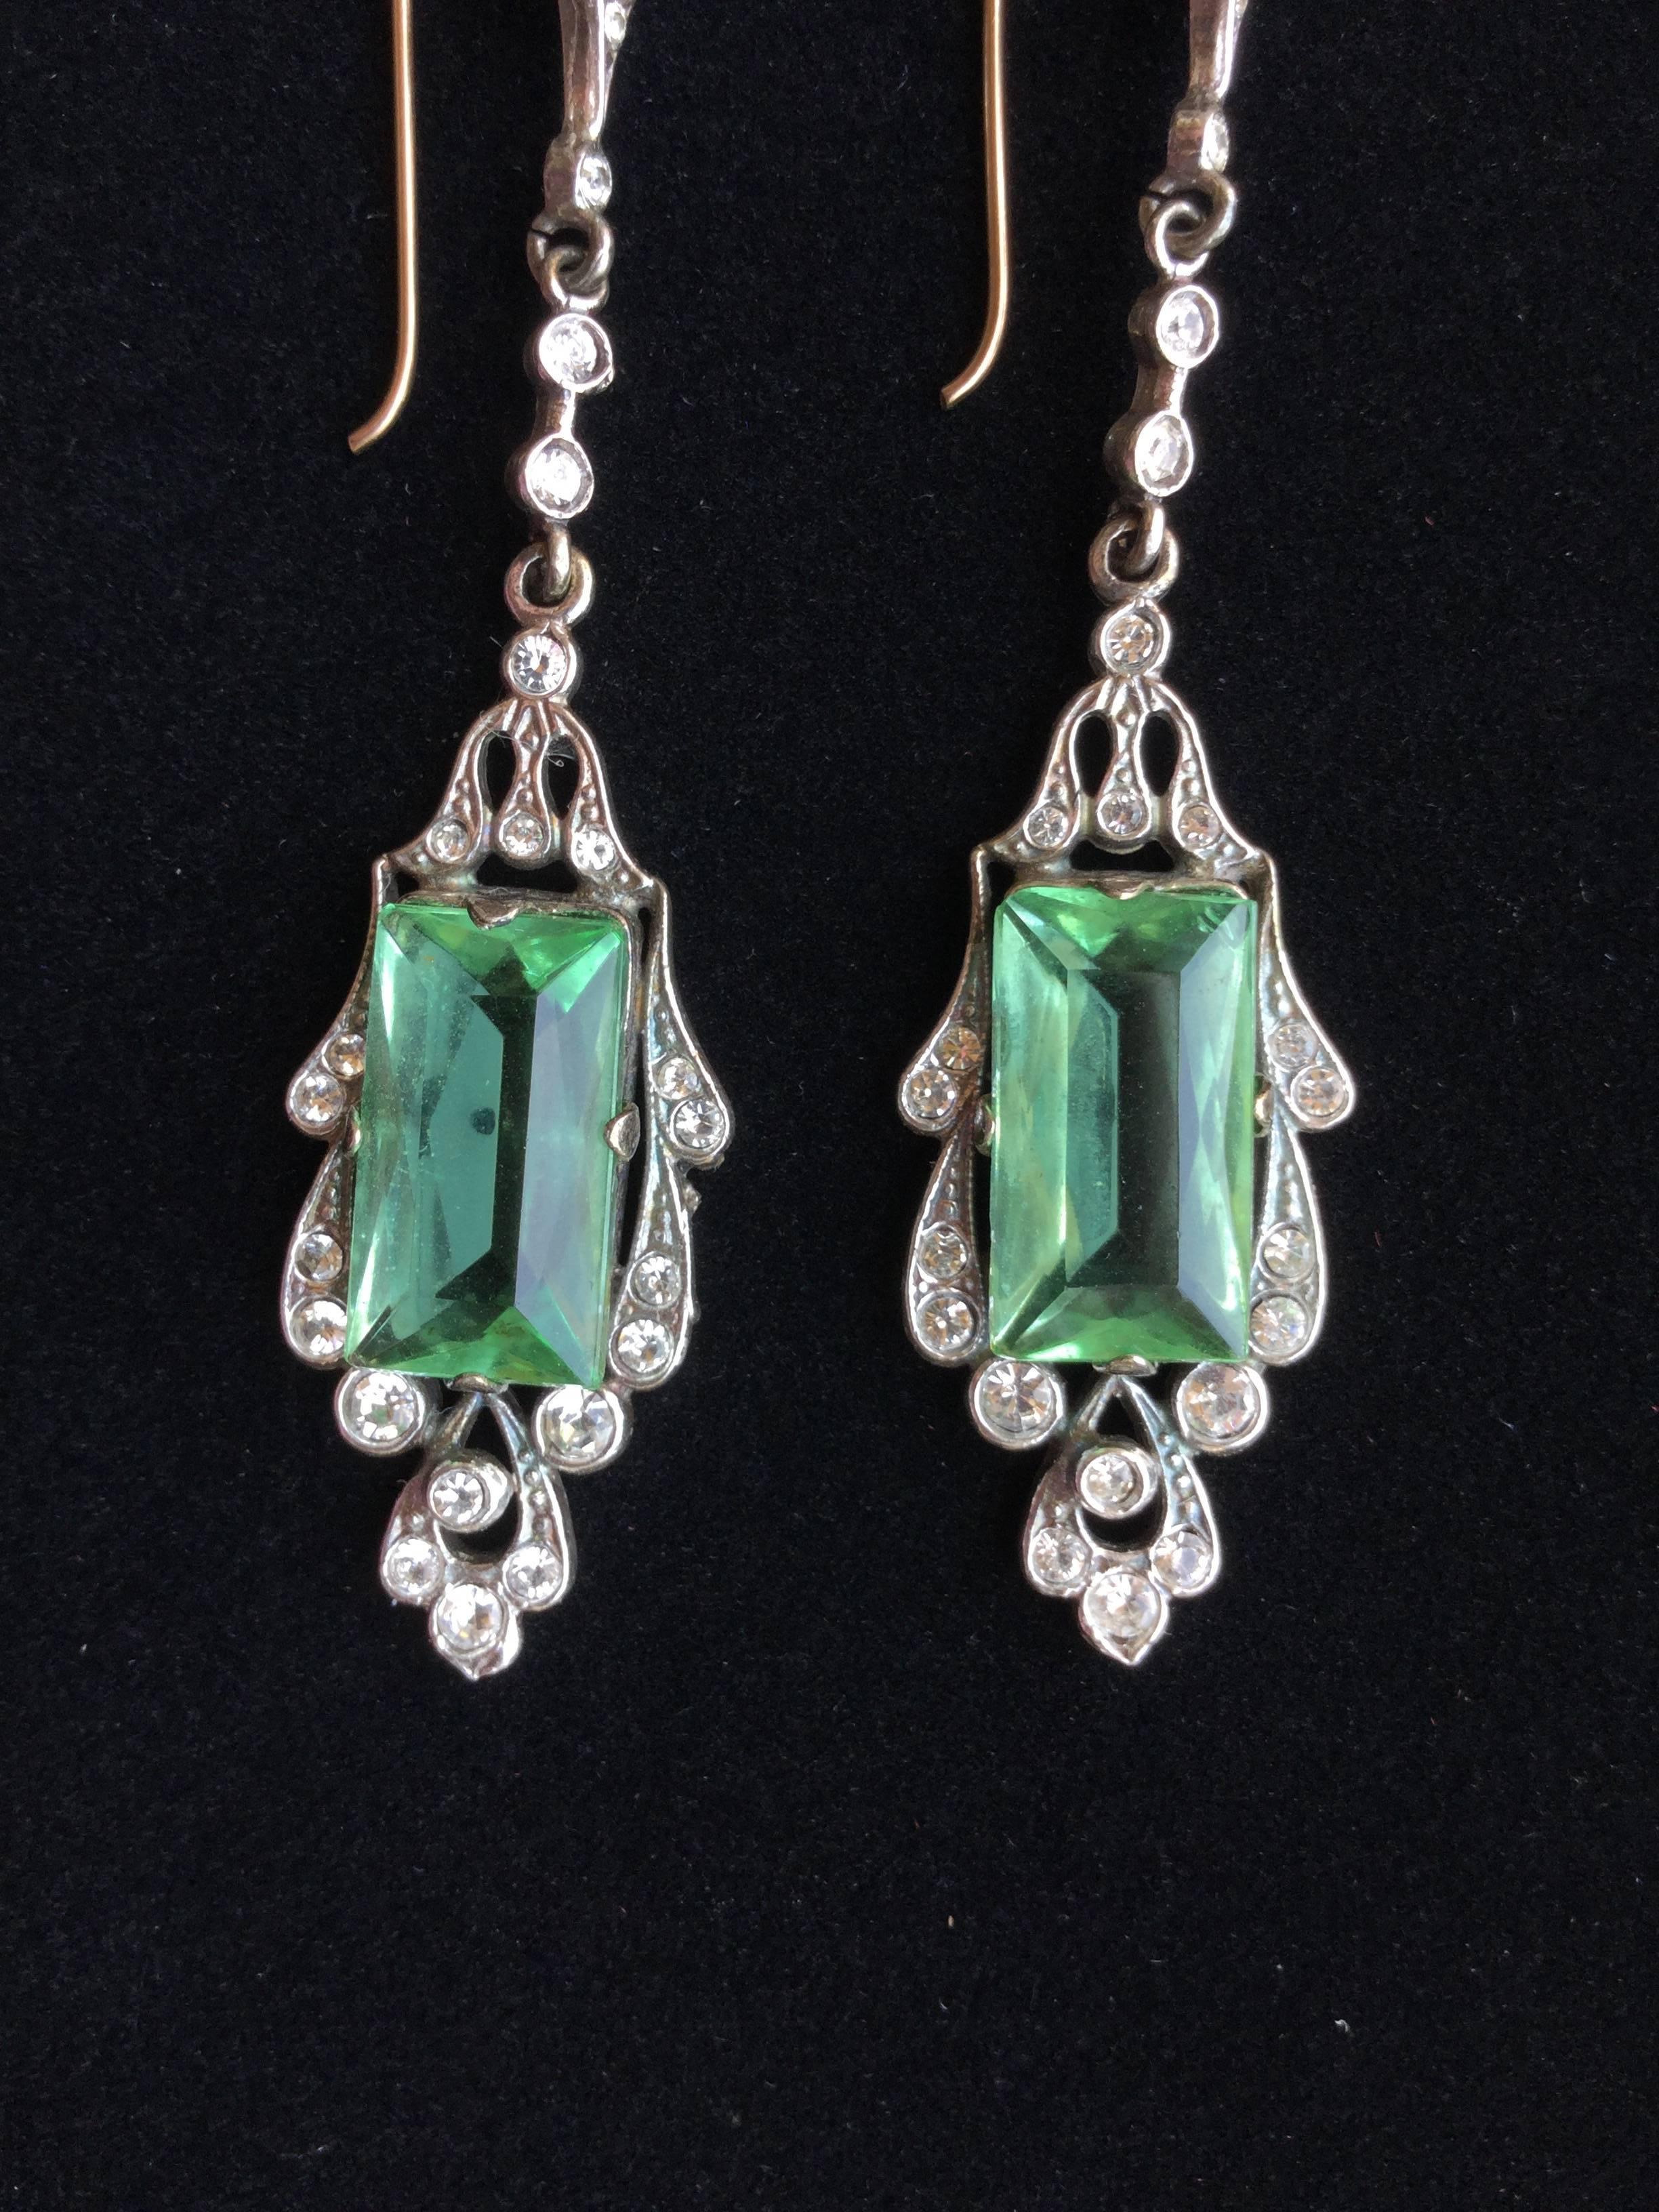 Romantic antique drop earrings of sterling silver and peridot colored faceted
pastes enlivened with bezel set crystals. Gold filled wires. Drop: 2.5 inches.  Width: 5/8th of an inch at their widest. English c.1905. Unsigned. Tests as sterling